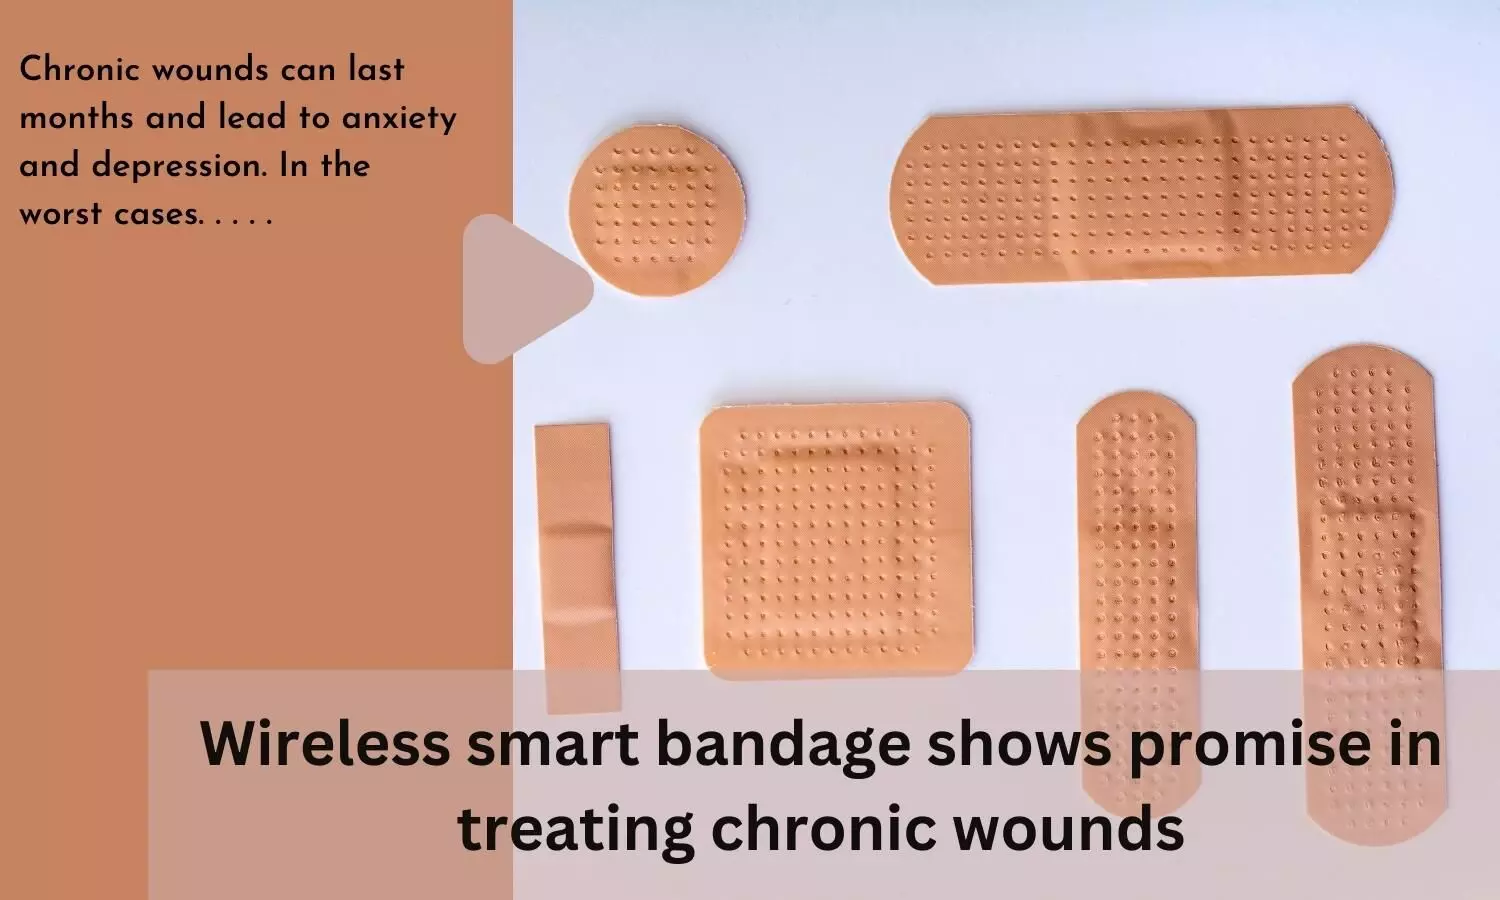 Wireless smart bandage shows promise in treating chronic wounds